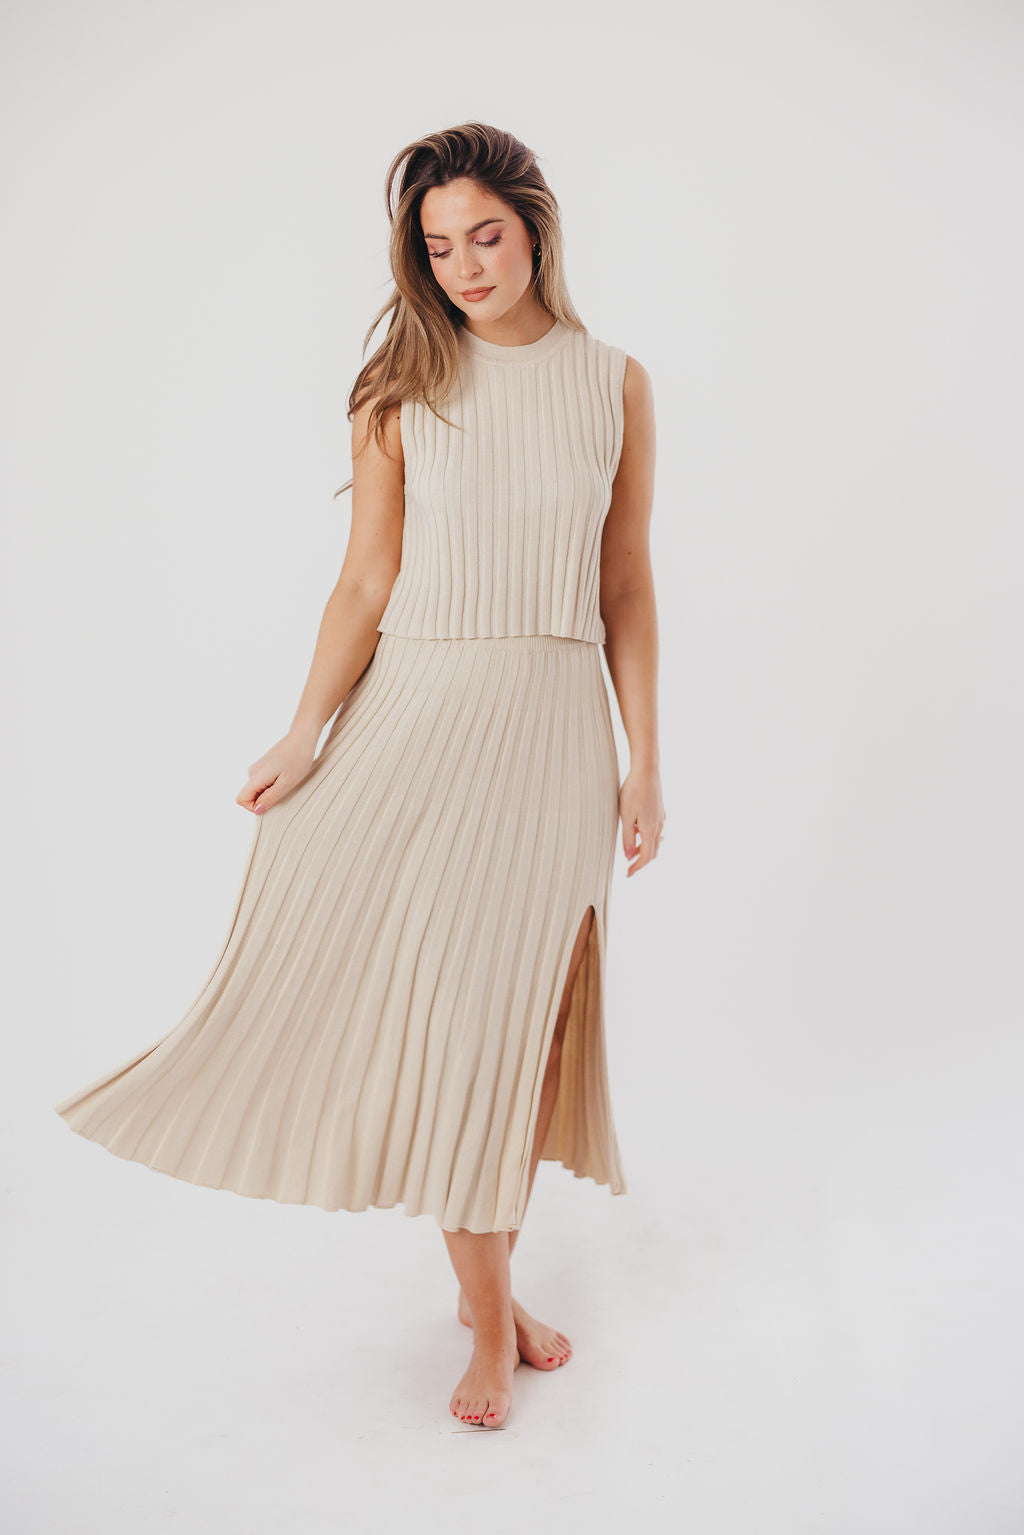 Sydney Knit Tank and Skirt Set in Tan